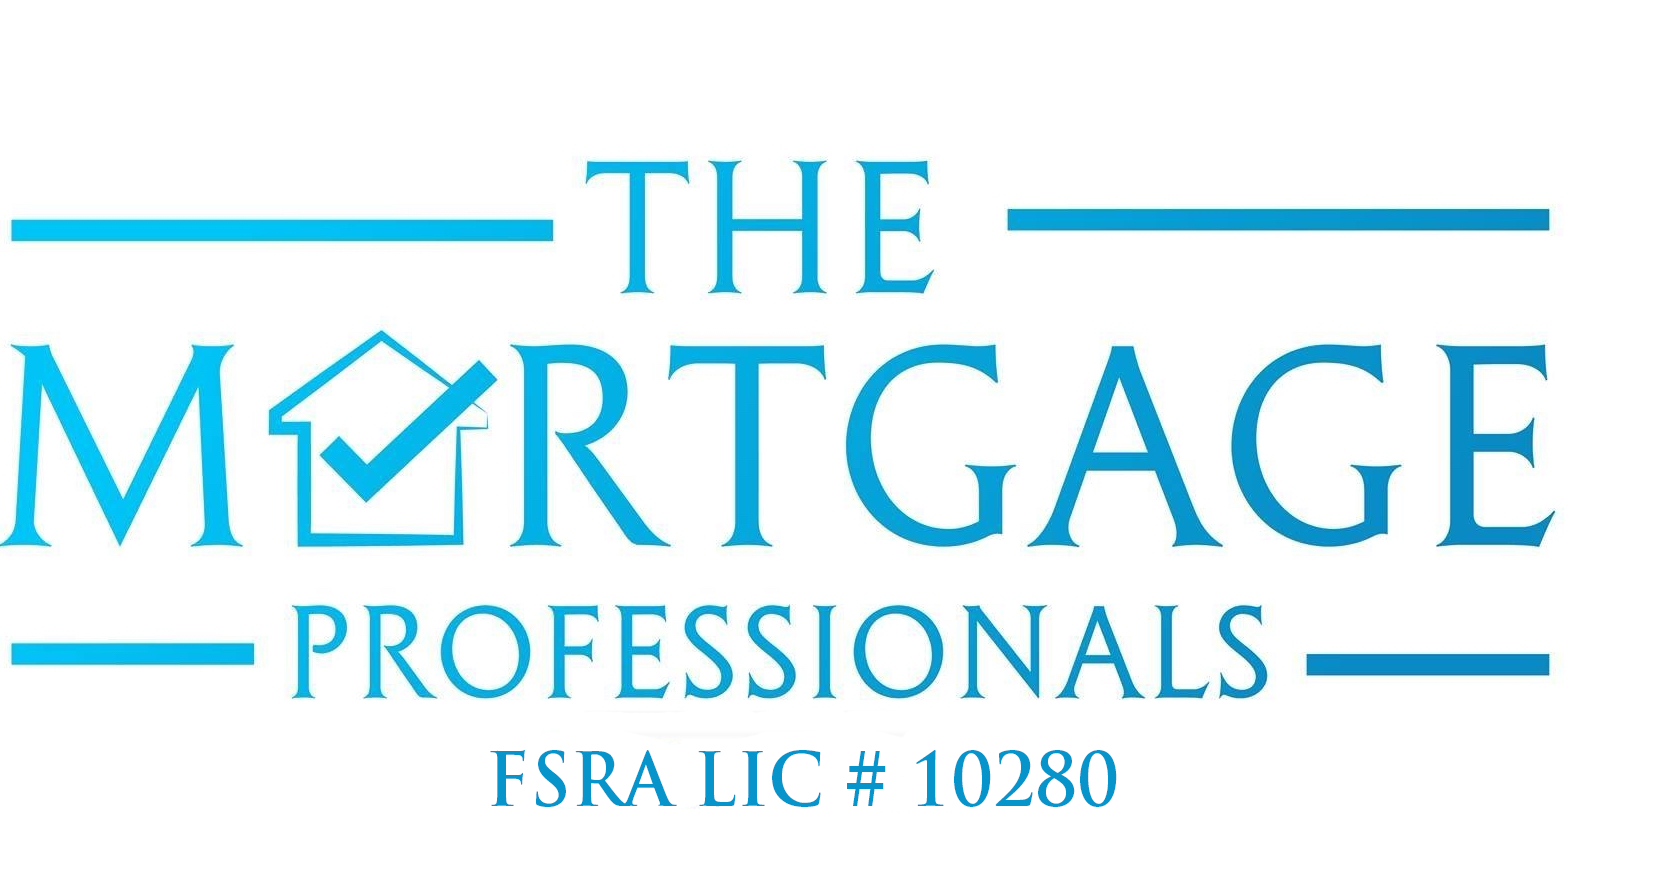 The Mortgage Professionals 